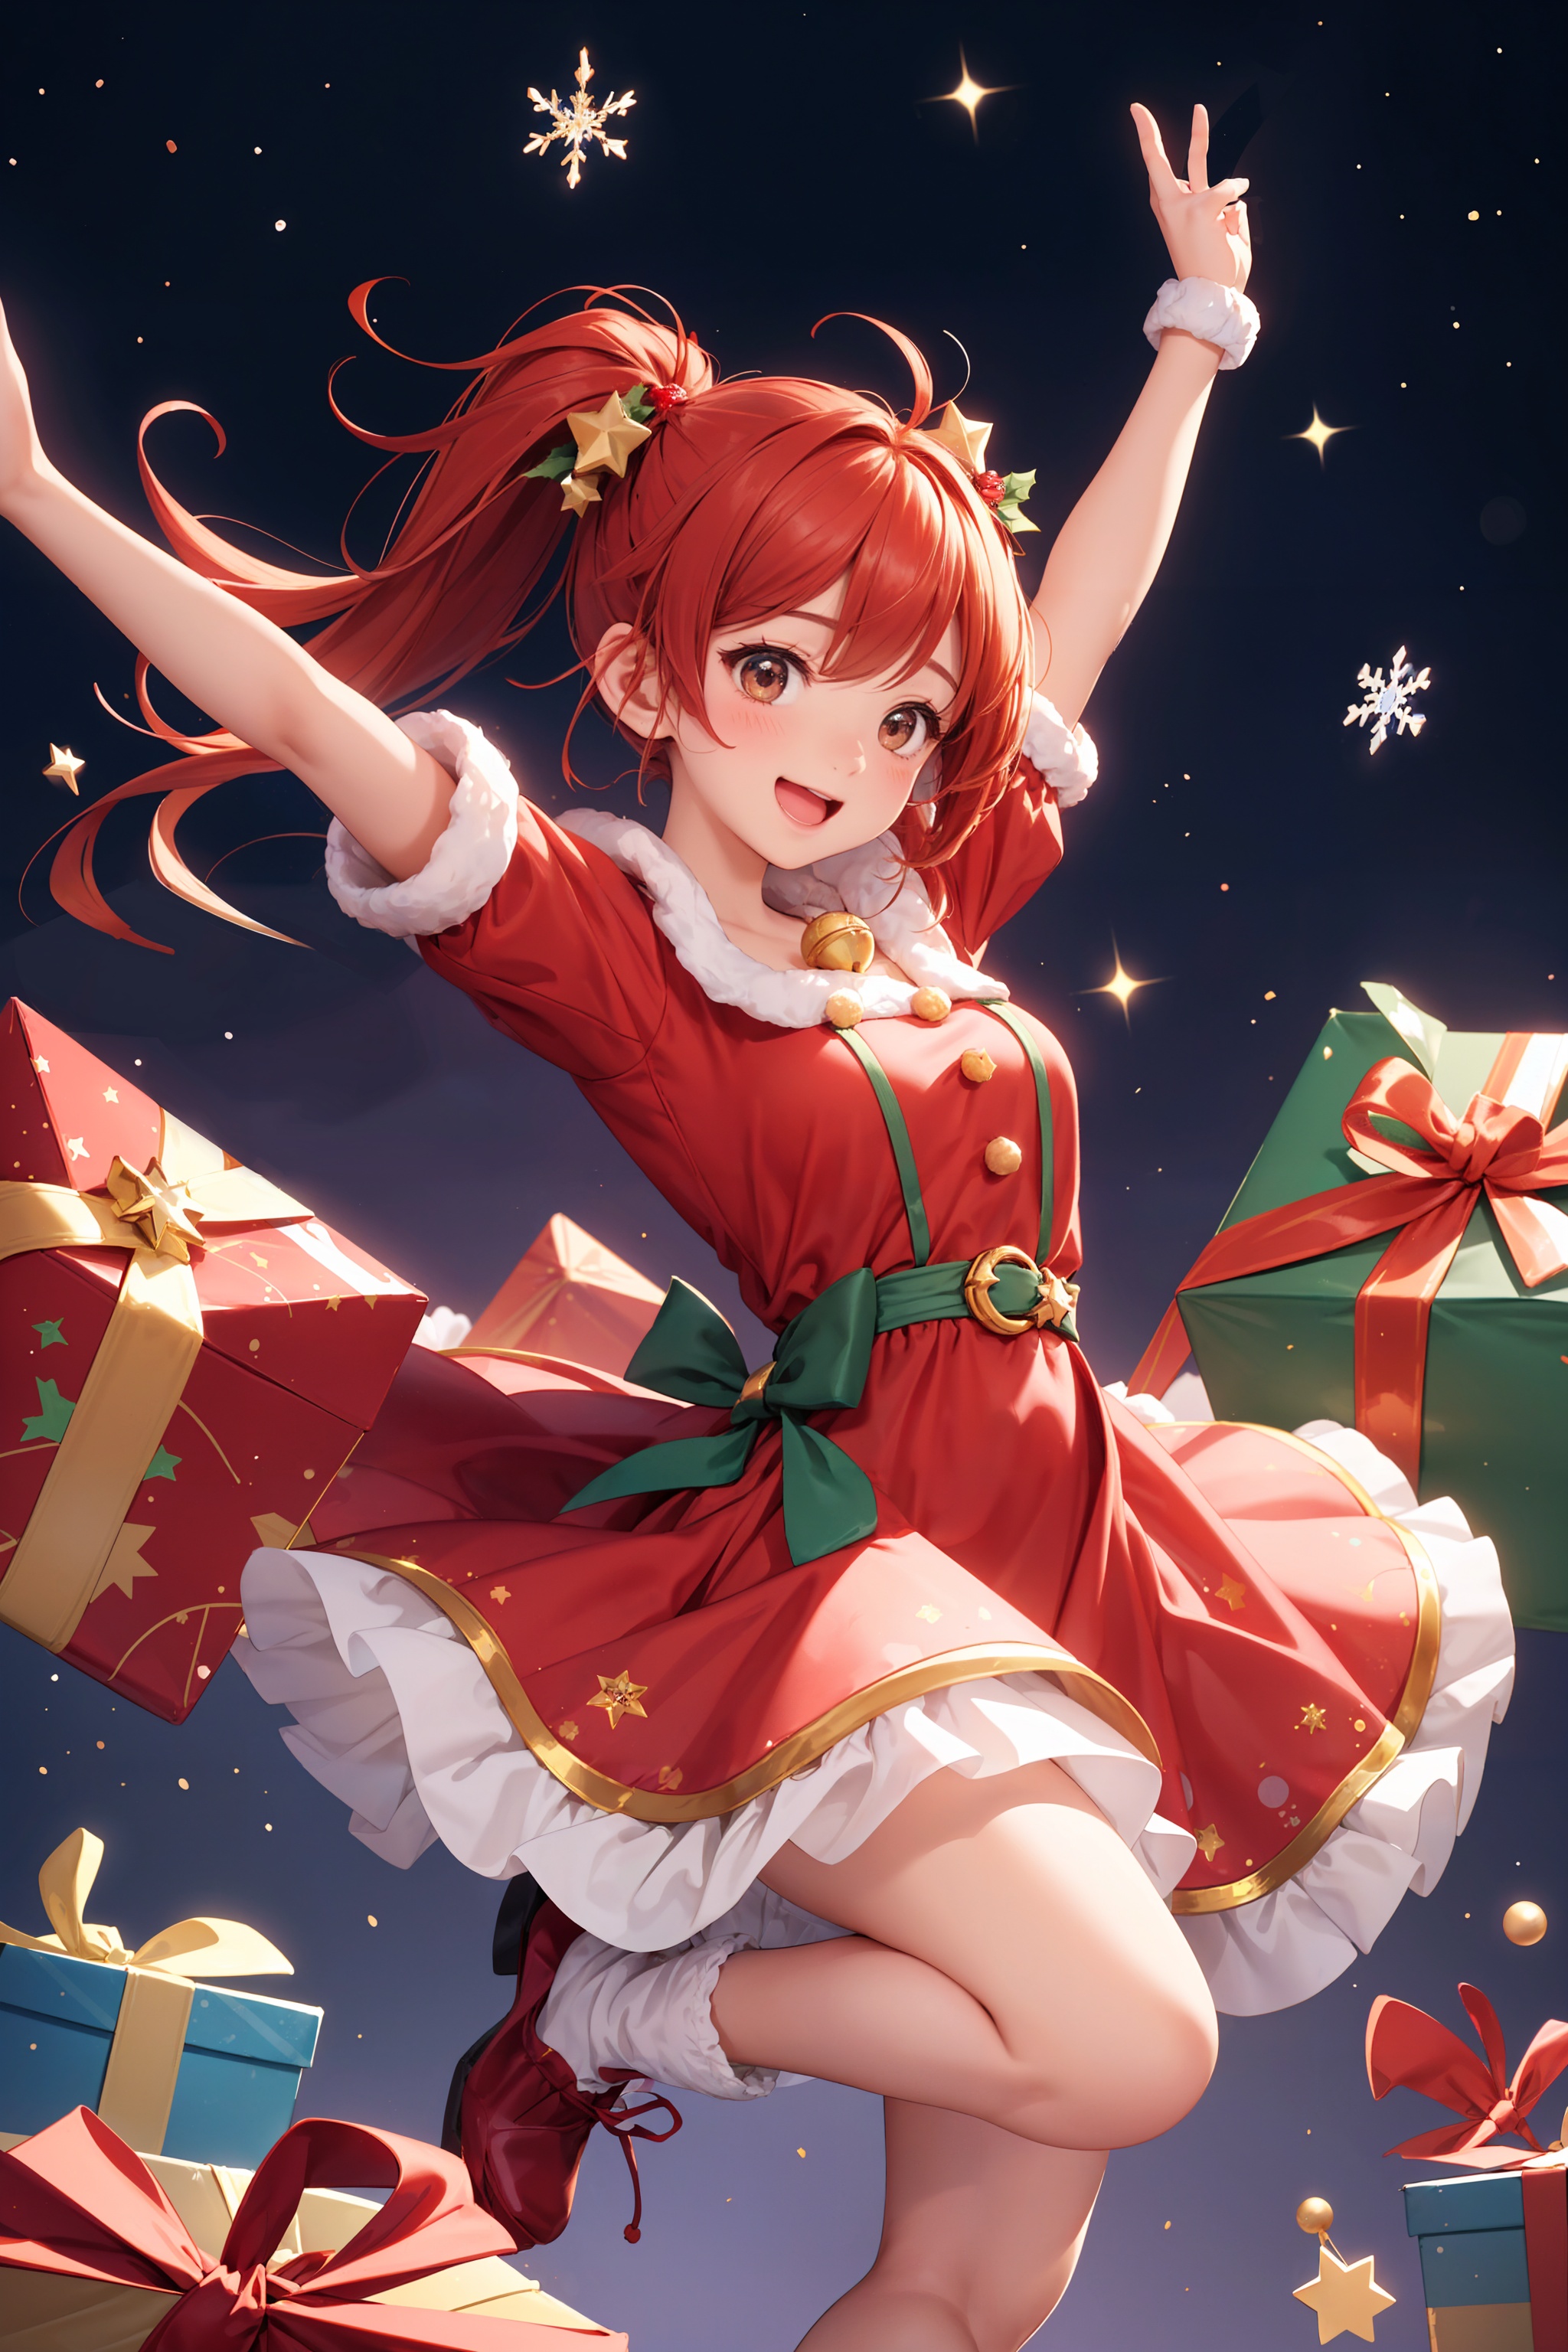 A charming illustration of a girl, radiating joy and excitement, at a Christmas party. The art form is reminiscent of a dynamic manga drawing, capturing the girl's playful and adorable expression. She wears a vibrant red Christmas costume, featuring a frilly dress adorned with bells and a star-shaped accessory in her hair. Surrounding her, colorful presents are stacked, adding to the festive atmosphere. The scene is set against a simple background, allowing the focus to be on the girl and her joyful presence. In a whimsical twist, she sits atop a large star, as if floating in the air, adding a touch of magic to the illustration. The overall result is a delightful depiction of a girl enjoying the holiday spirit with her friends, evoking a sense of warmth and happiness,jump up